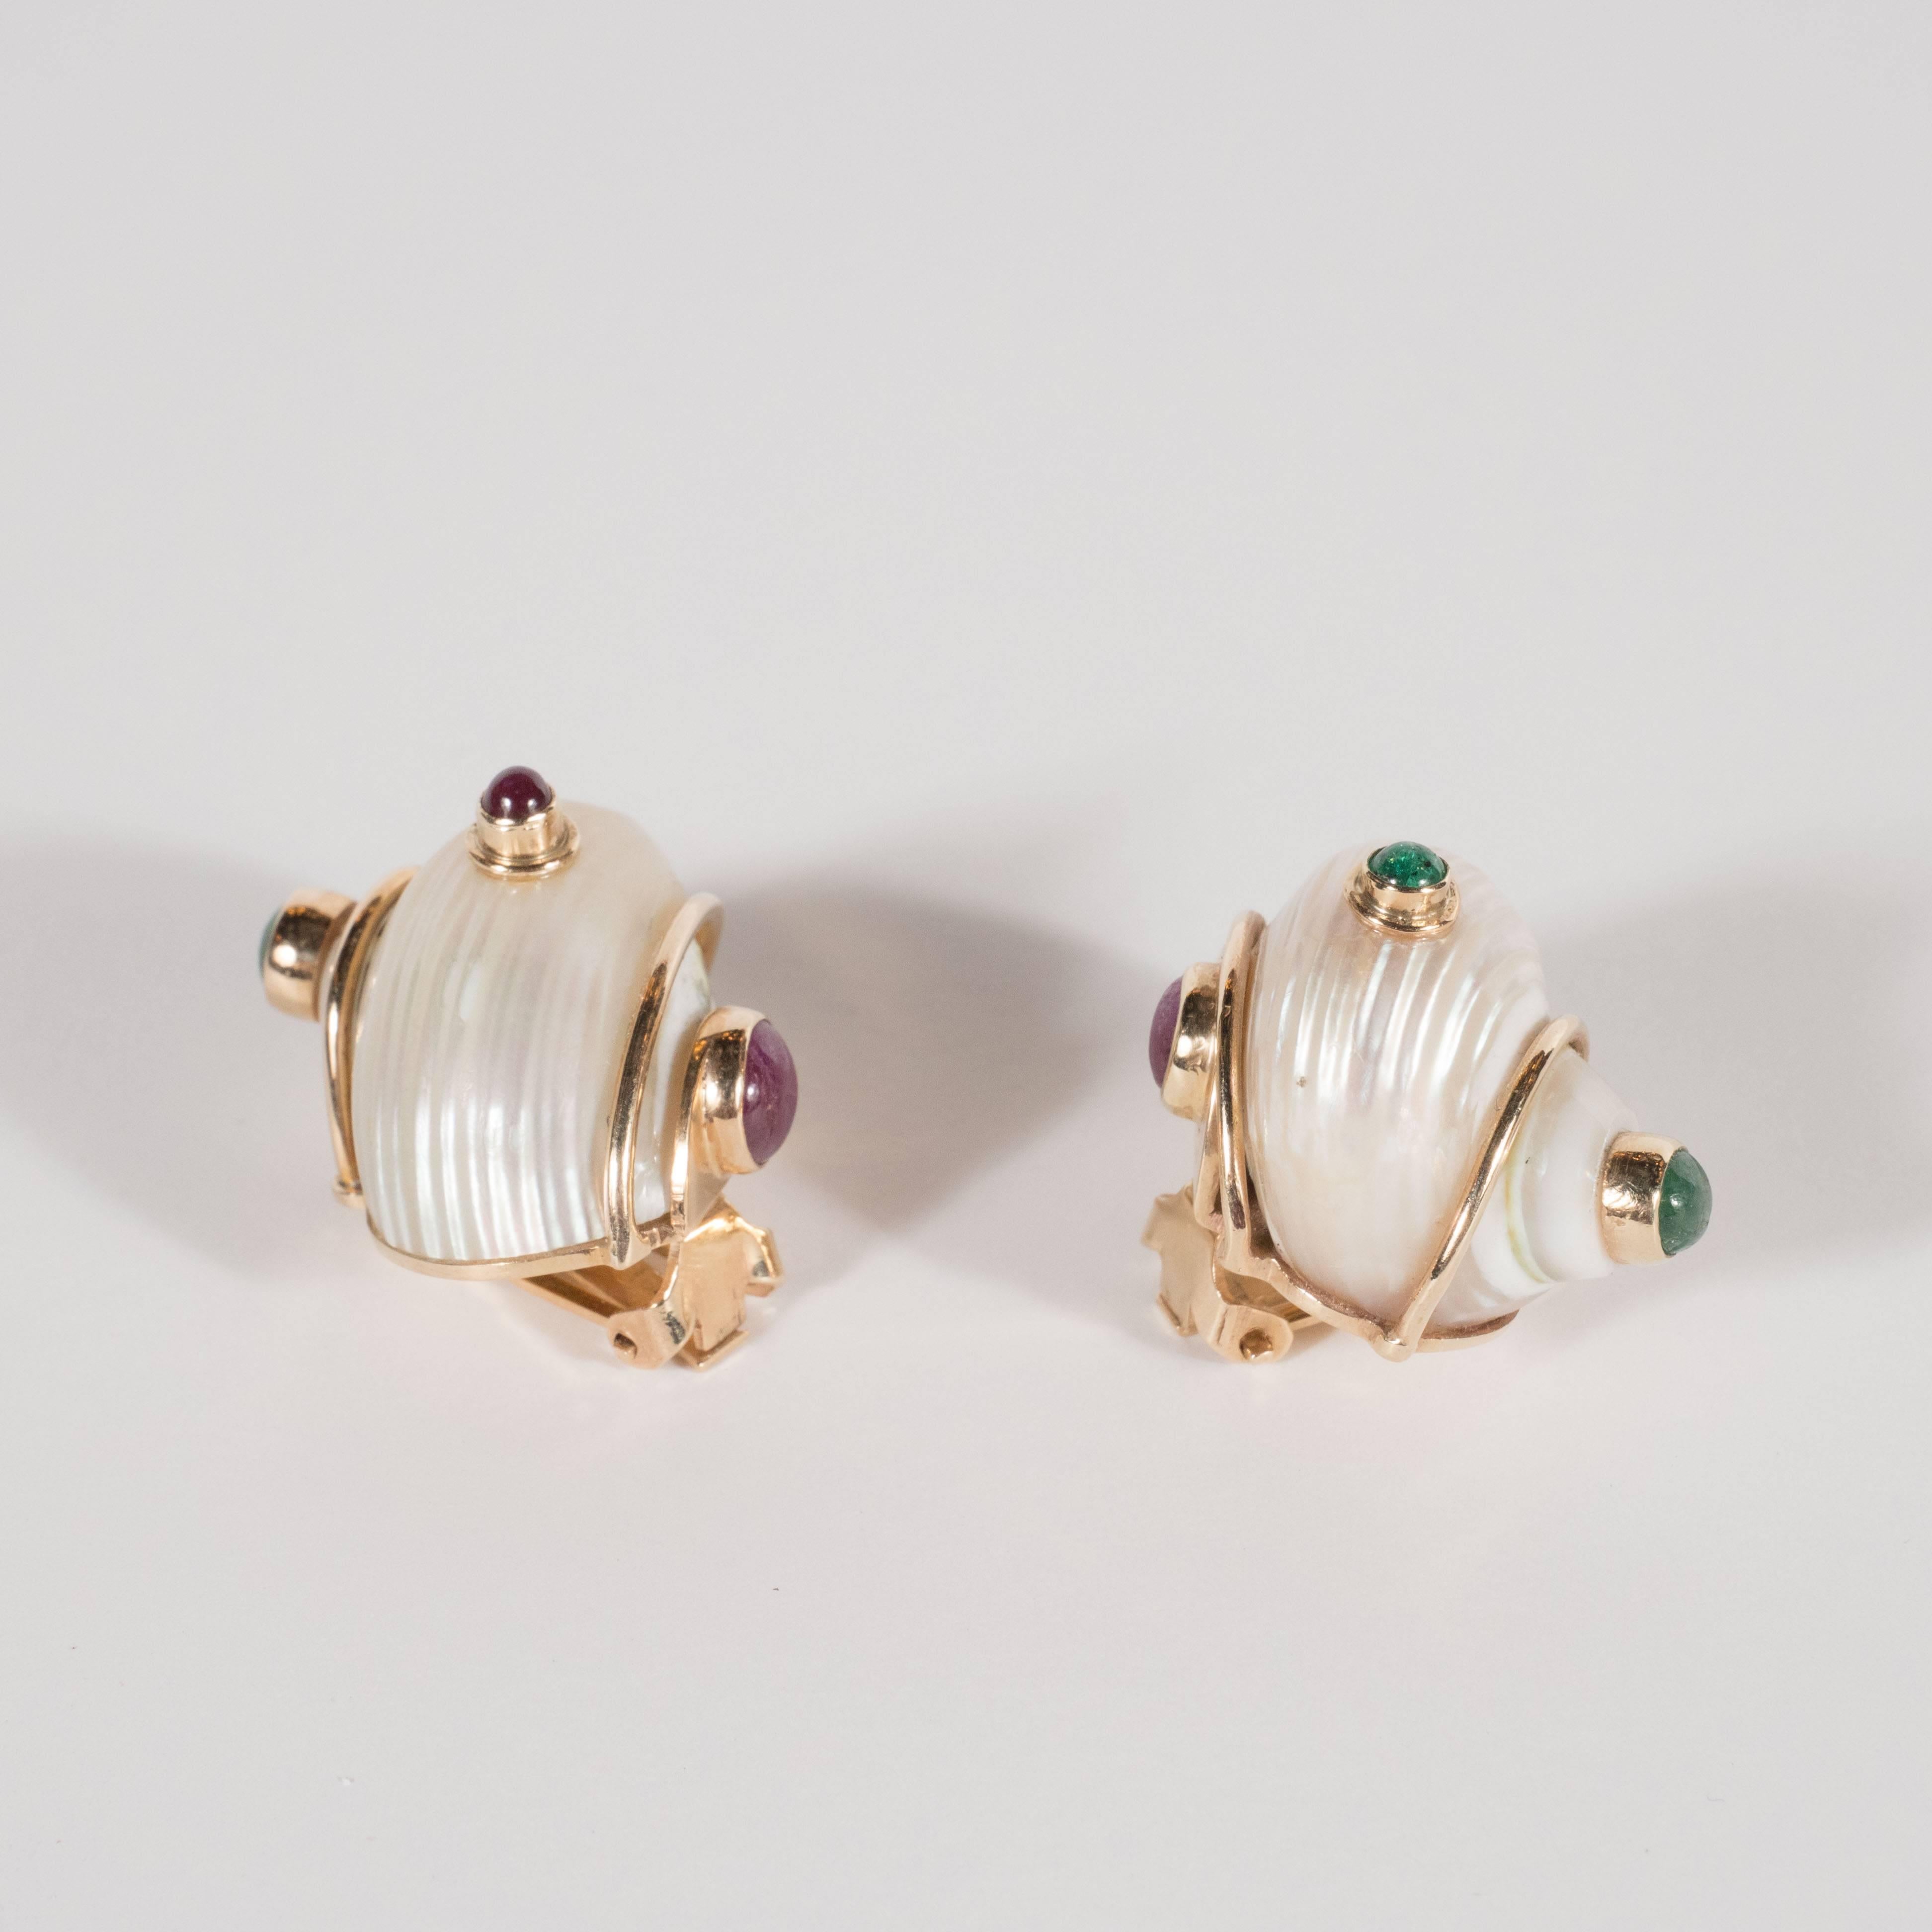 These stunning Mid Century Modern Seaman Schepps earrings were realized circa 1968 by the esteemed jewelry designer Patricia Schepps Vail- former president of the storied Fifth Avenue store, known for producing some of the century's most exquisite